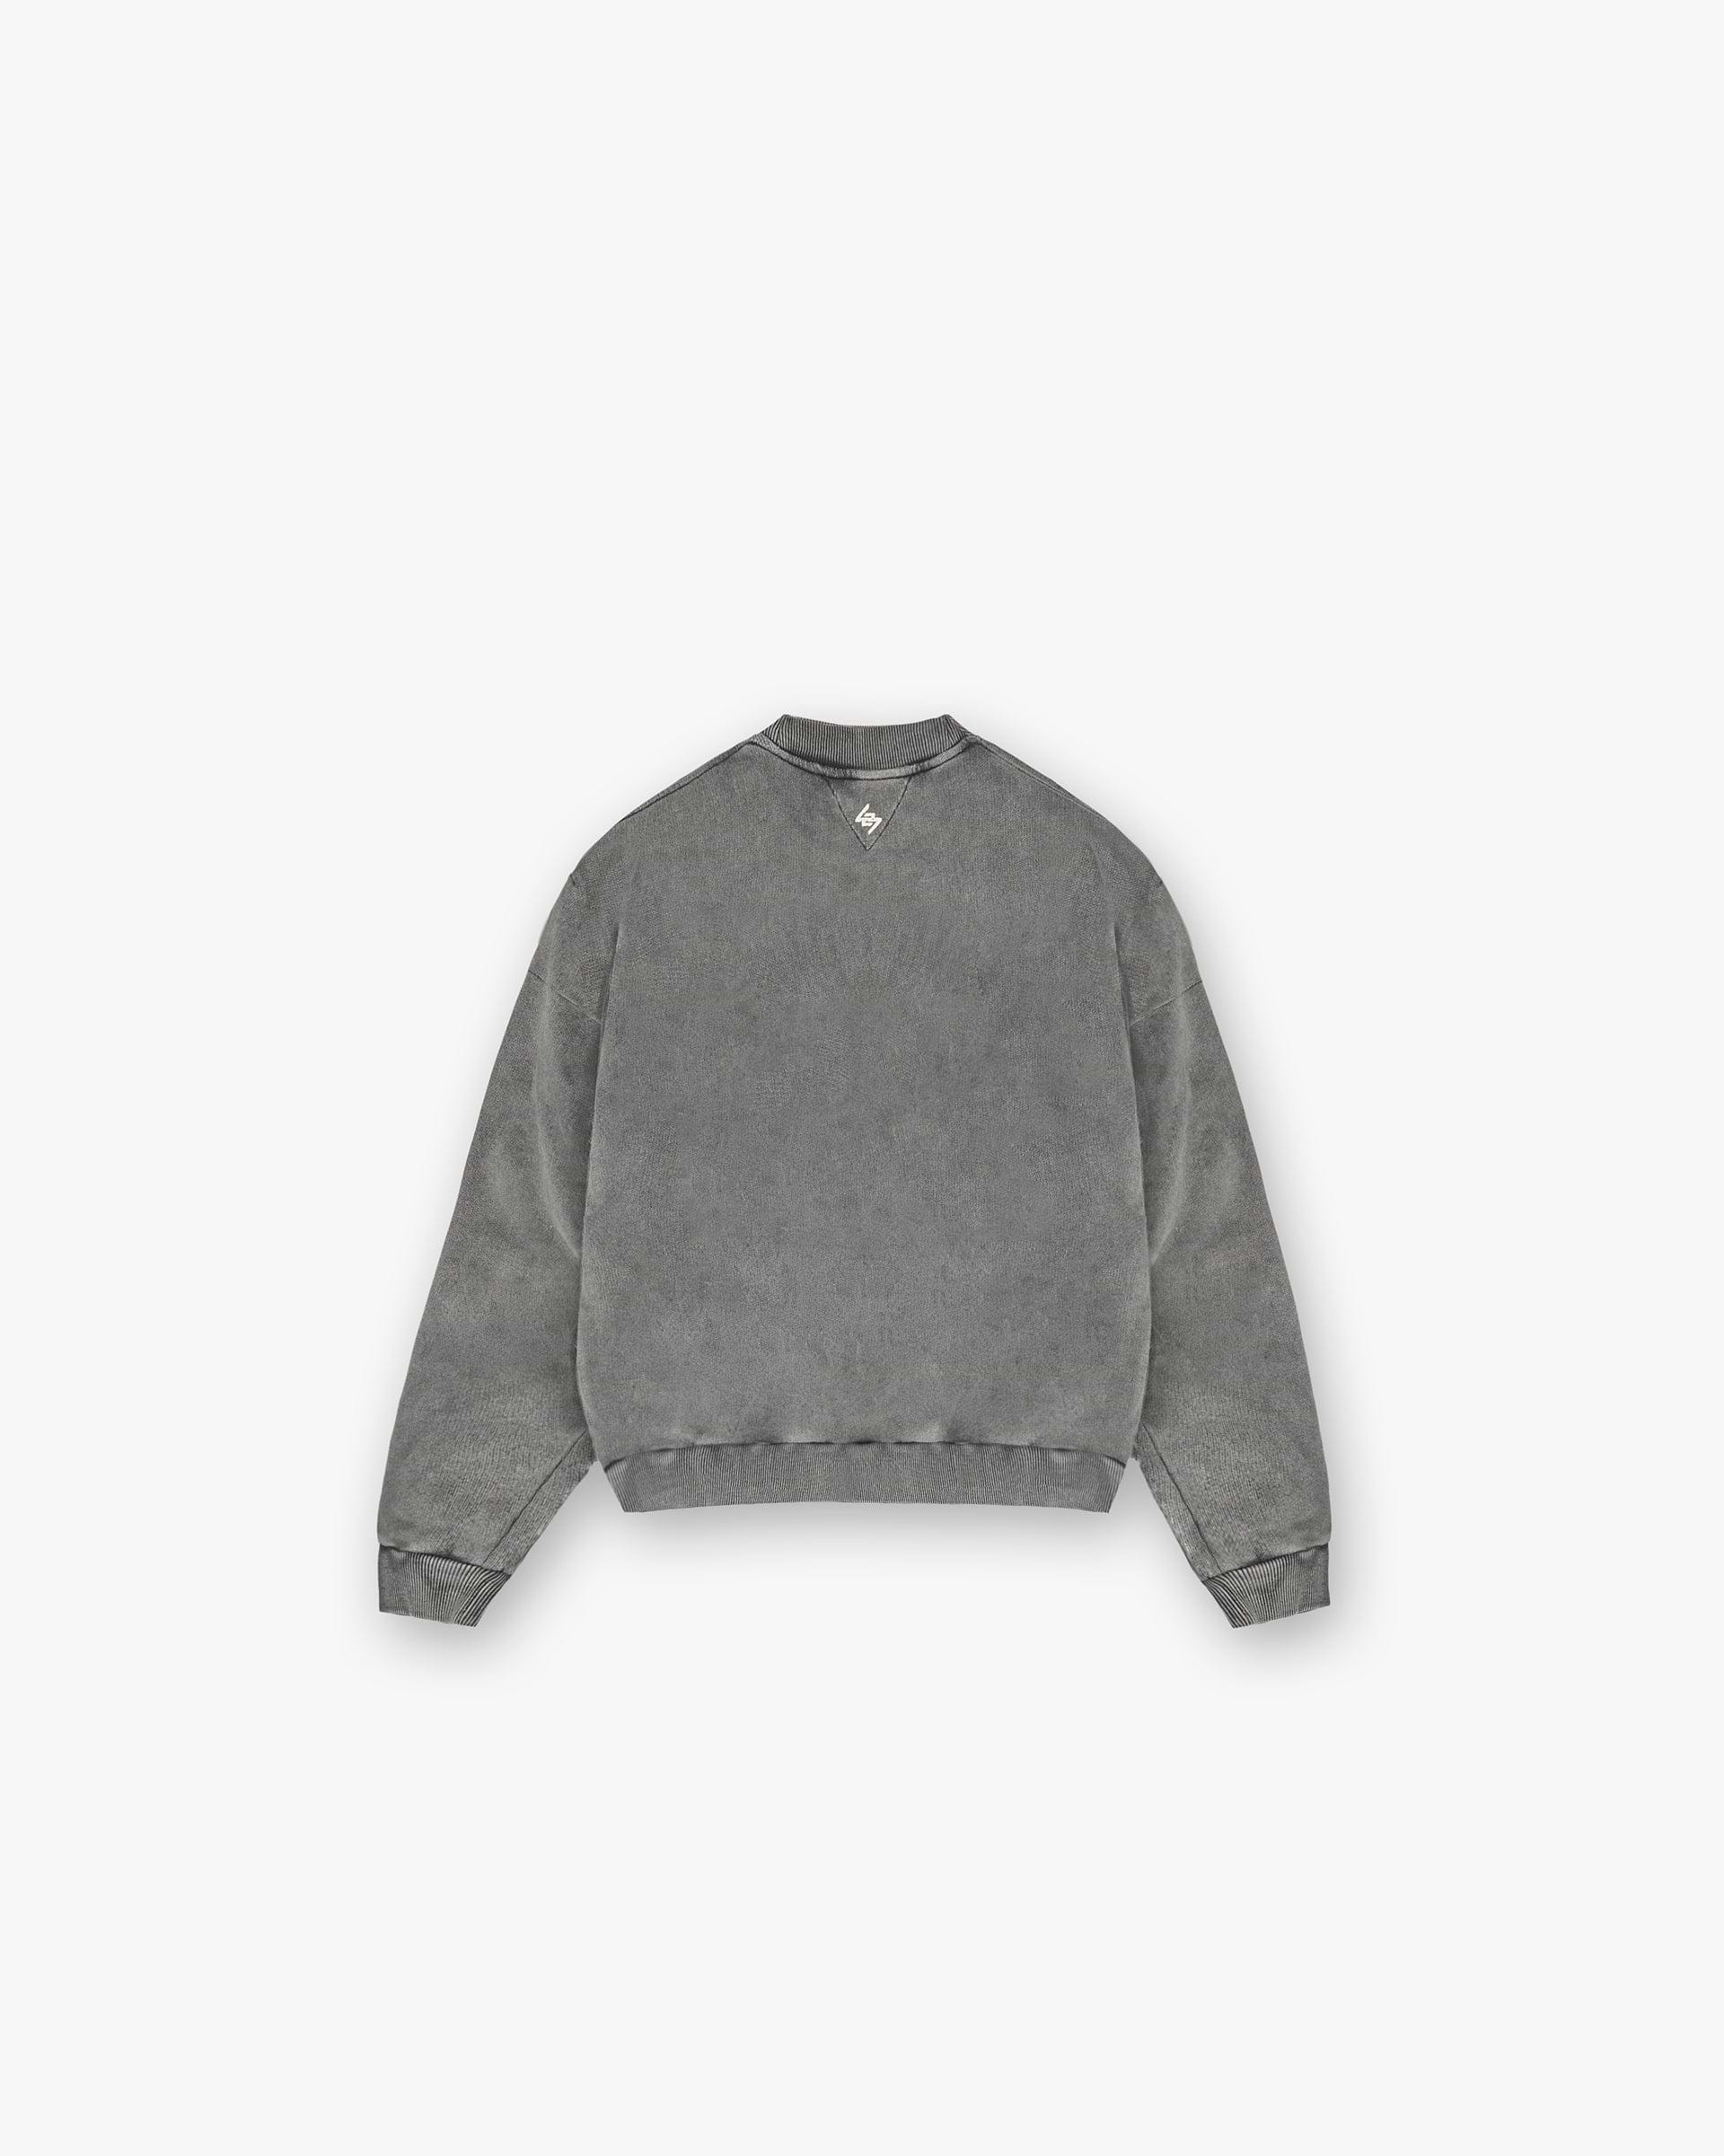 247 Vs The World Boxy Sweater - Pewter